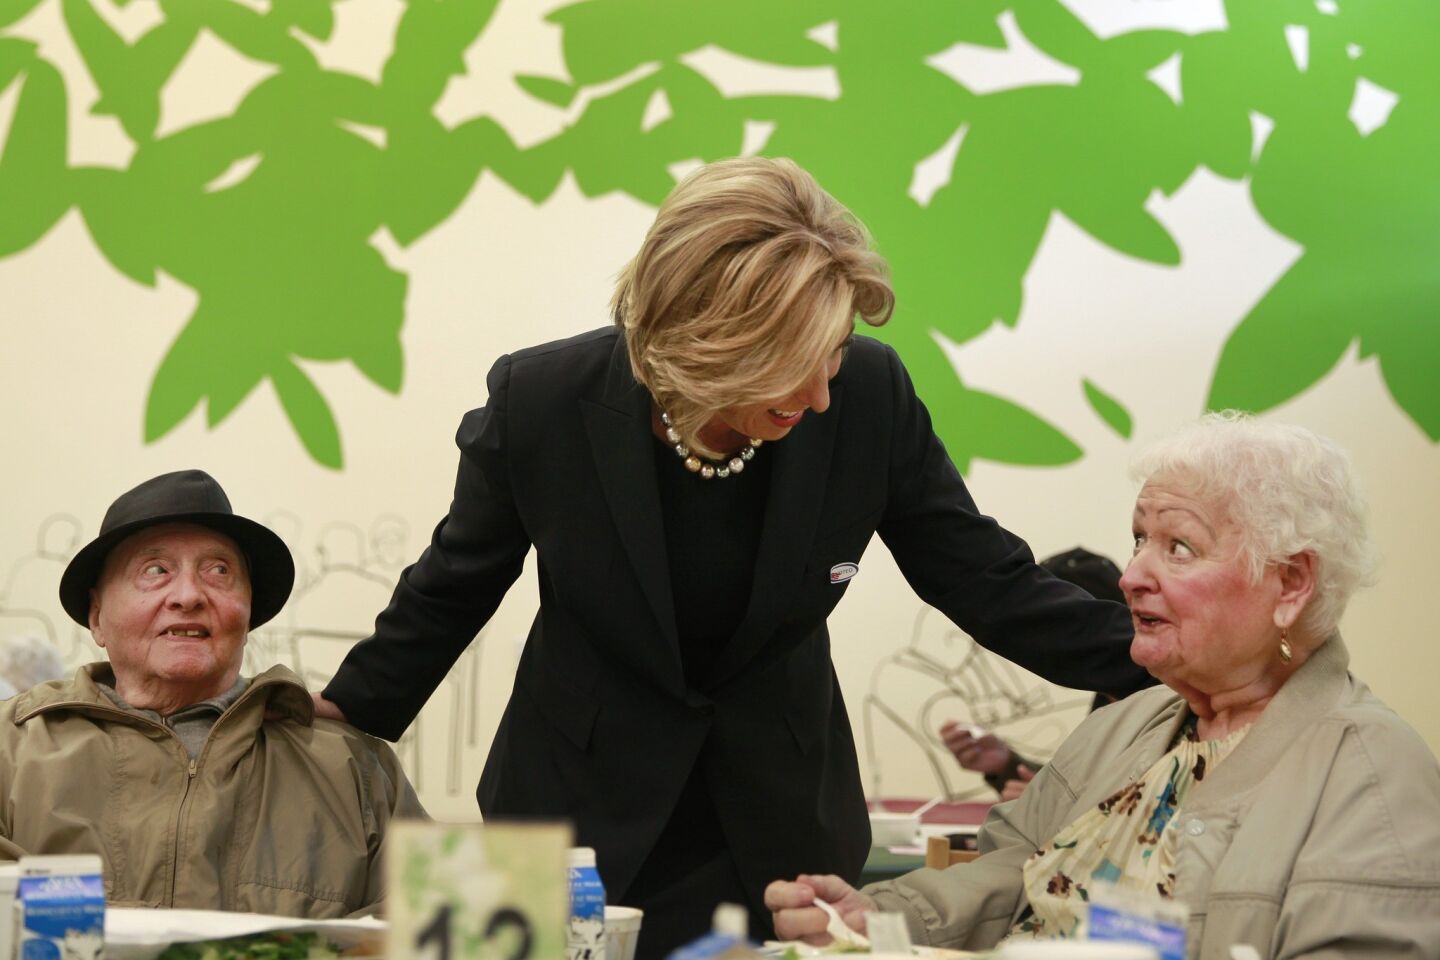 Mayoral candidate Wendy Greuel makes a campaign stop at the Sherman Oaks/East Valley Adult Center on election day.